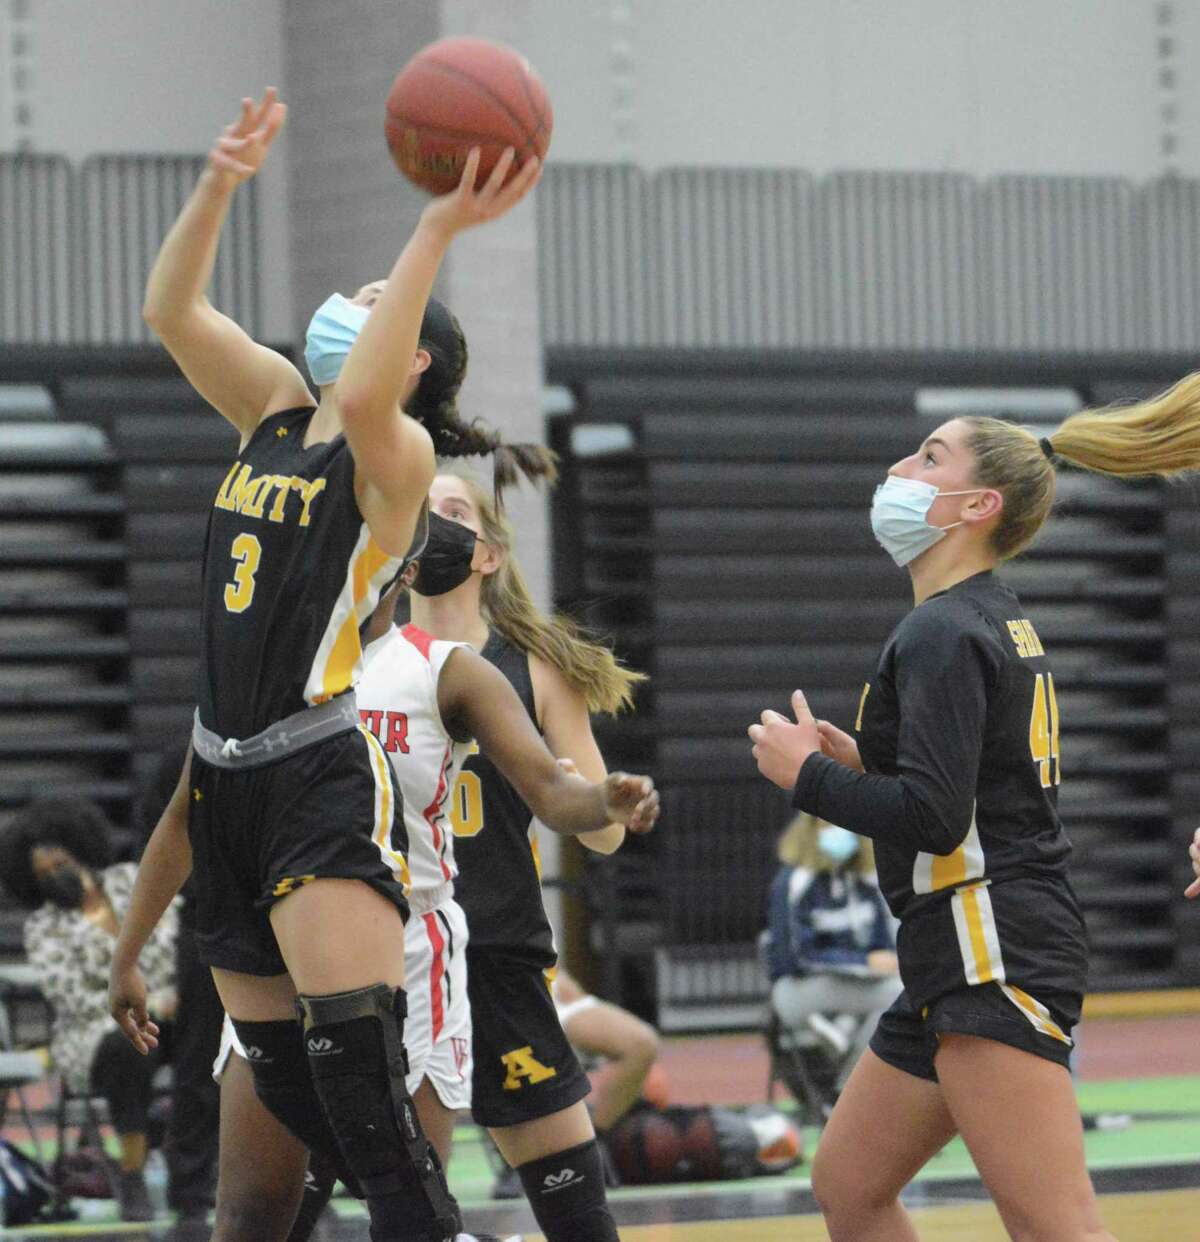 Amity Regional’s Skylar Burzynski (3) shoots as teammate Ribecka Marchitto (44) looks on during a girls basketball game against Wilbur Cross on Tuesday, March 2, 2021 in New Haven, Conn.